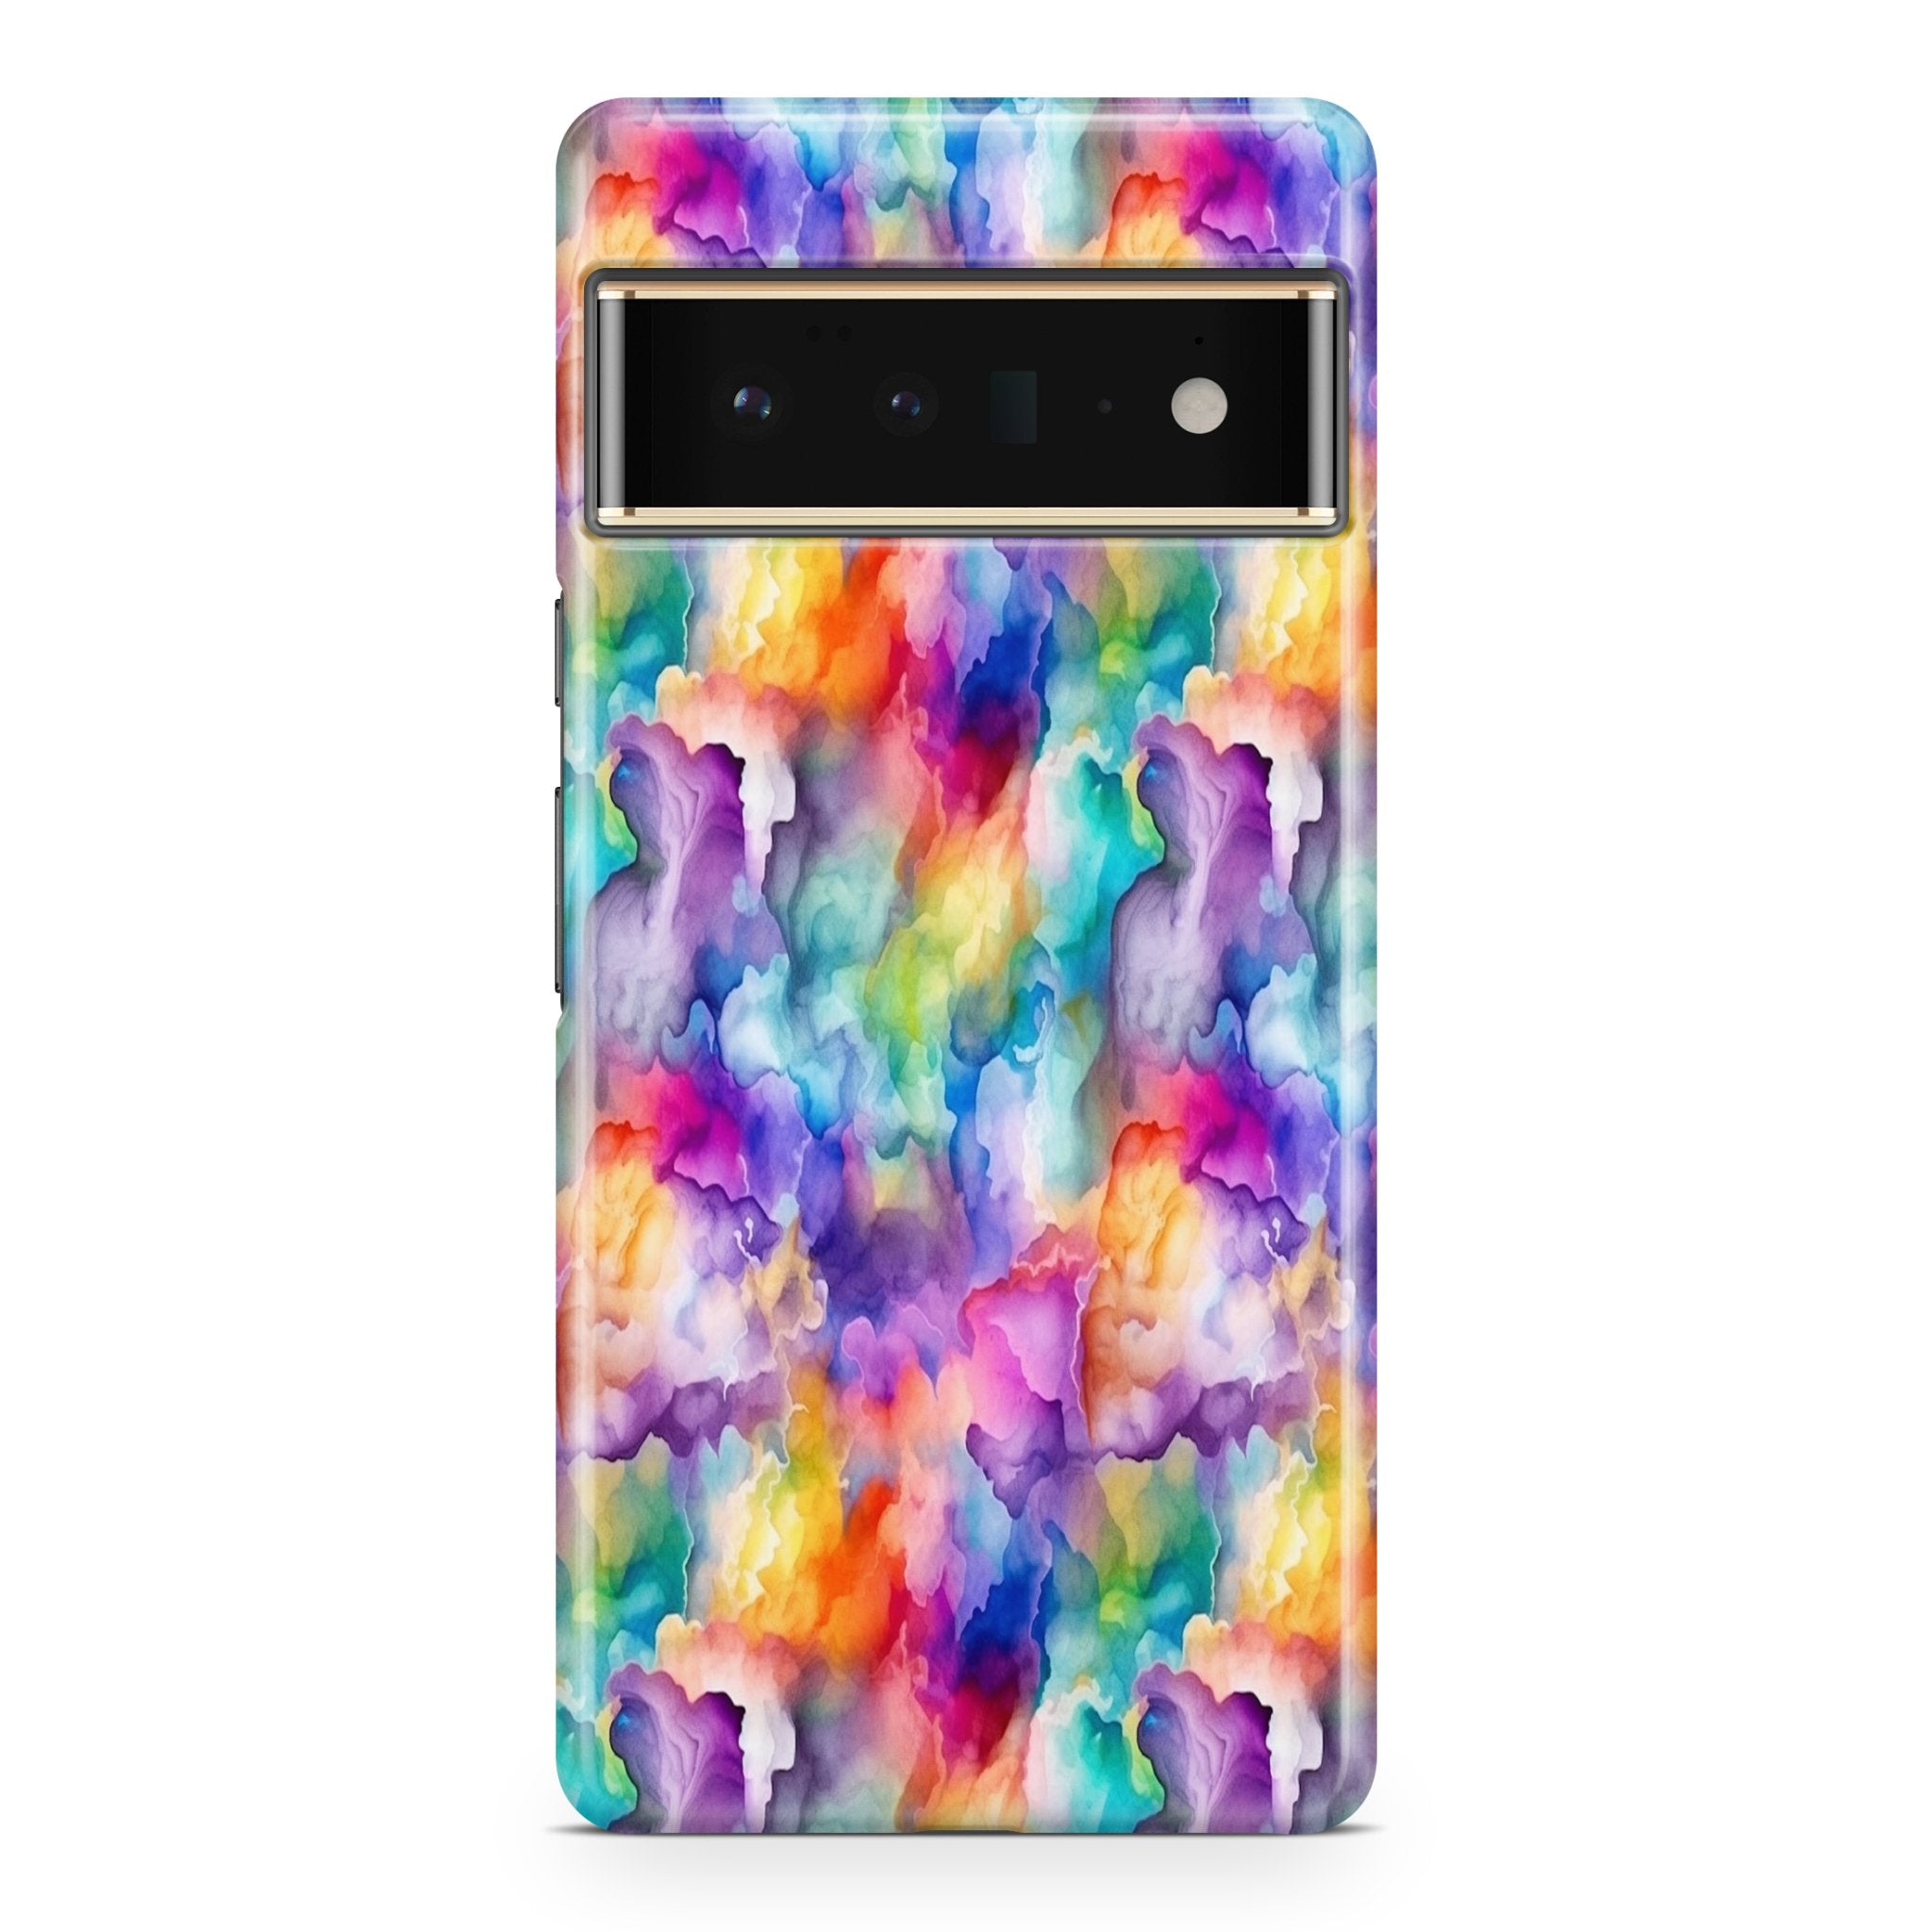 Chromatic Nimbus - Google phone case designs by CaseSwagger